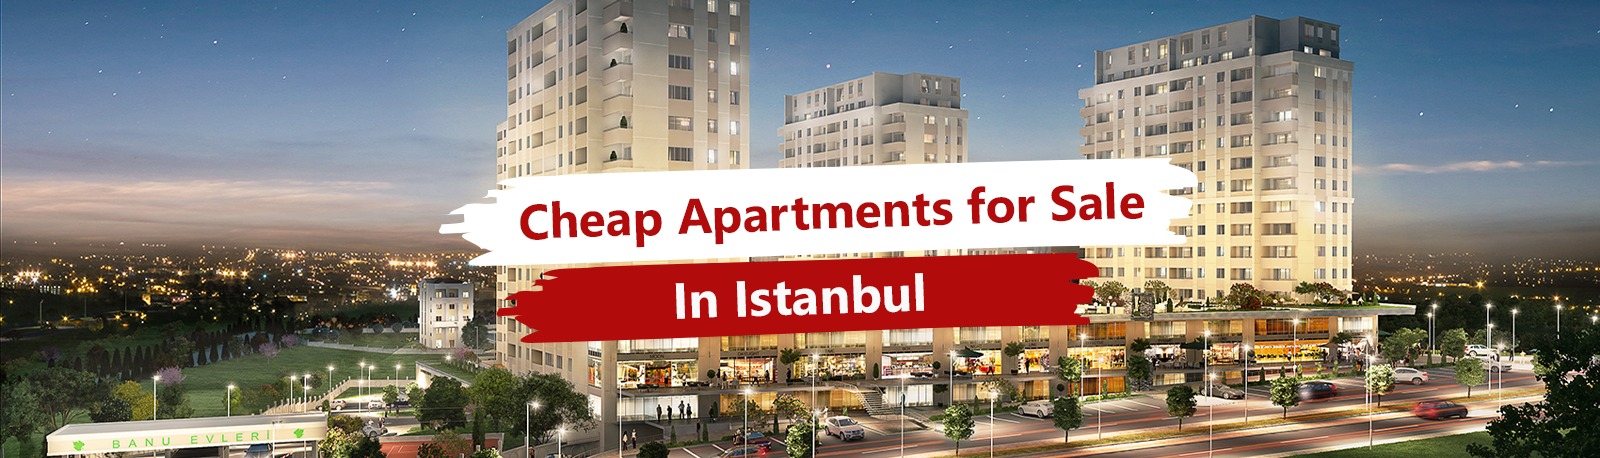 Cheap Apartments for Sale In Istanbul